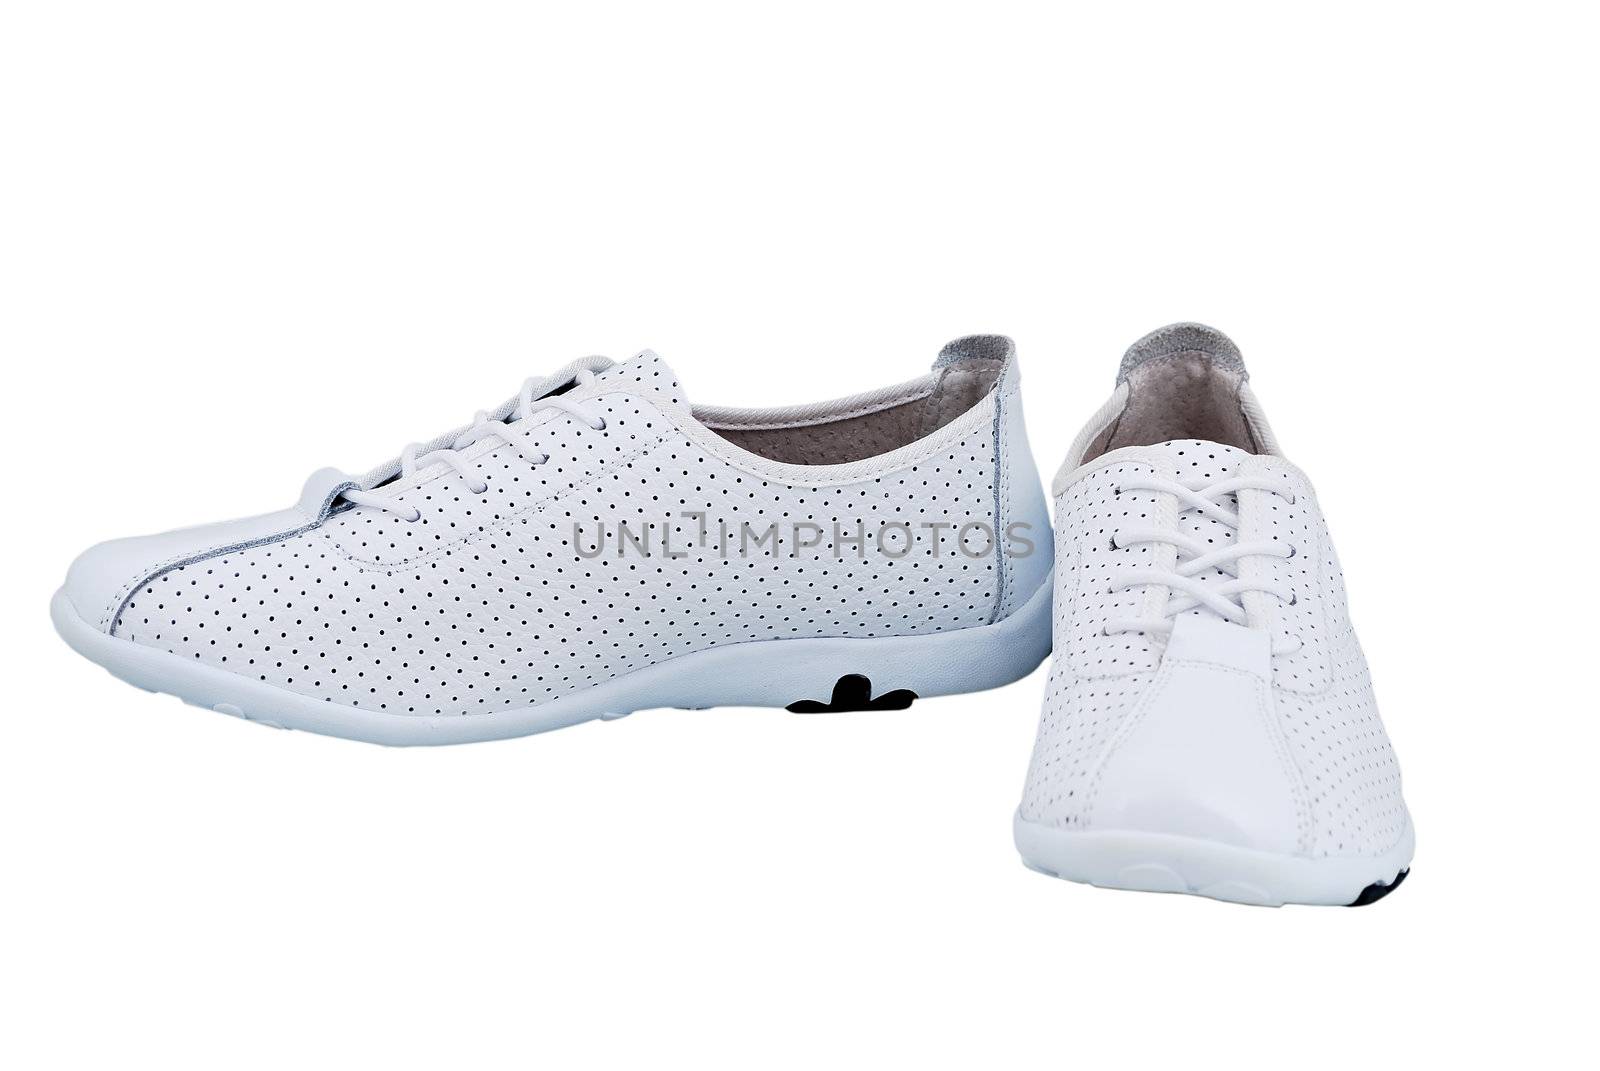 Women's sports shoes on a white background